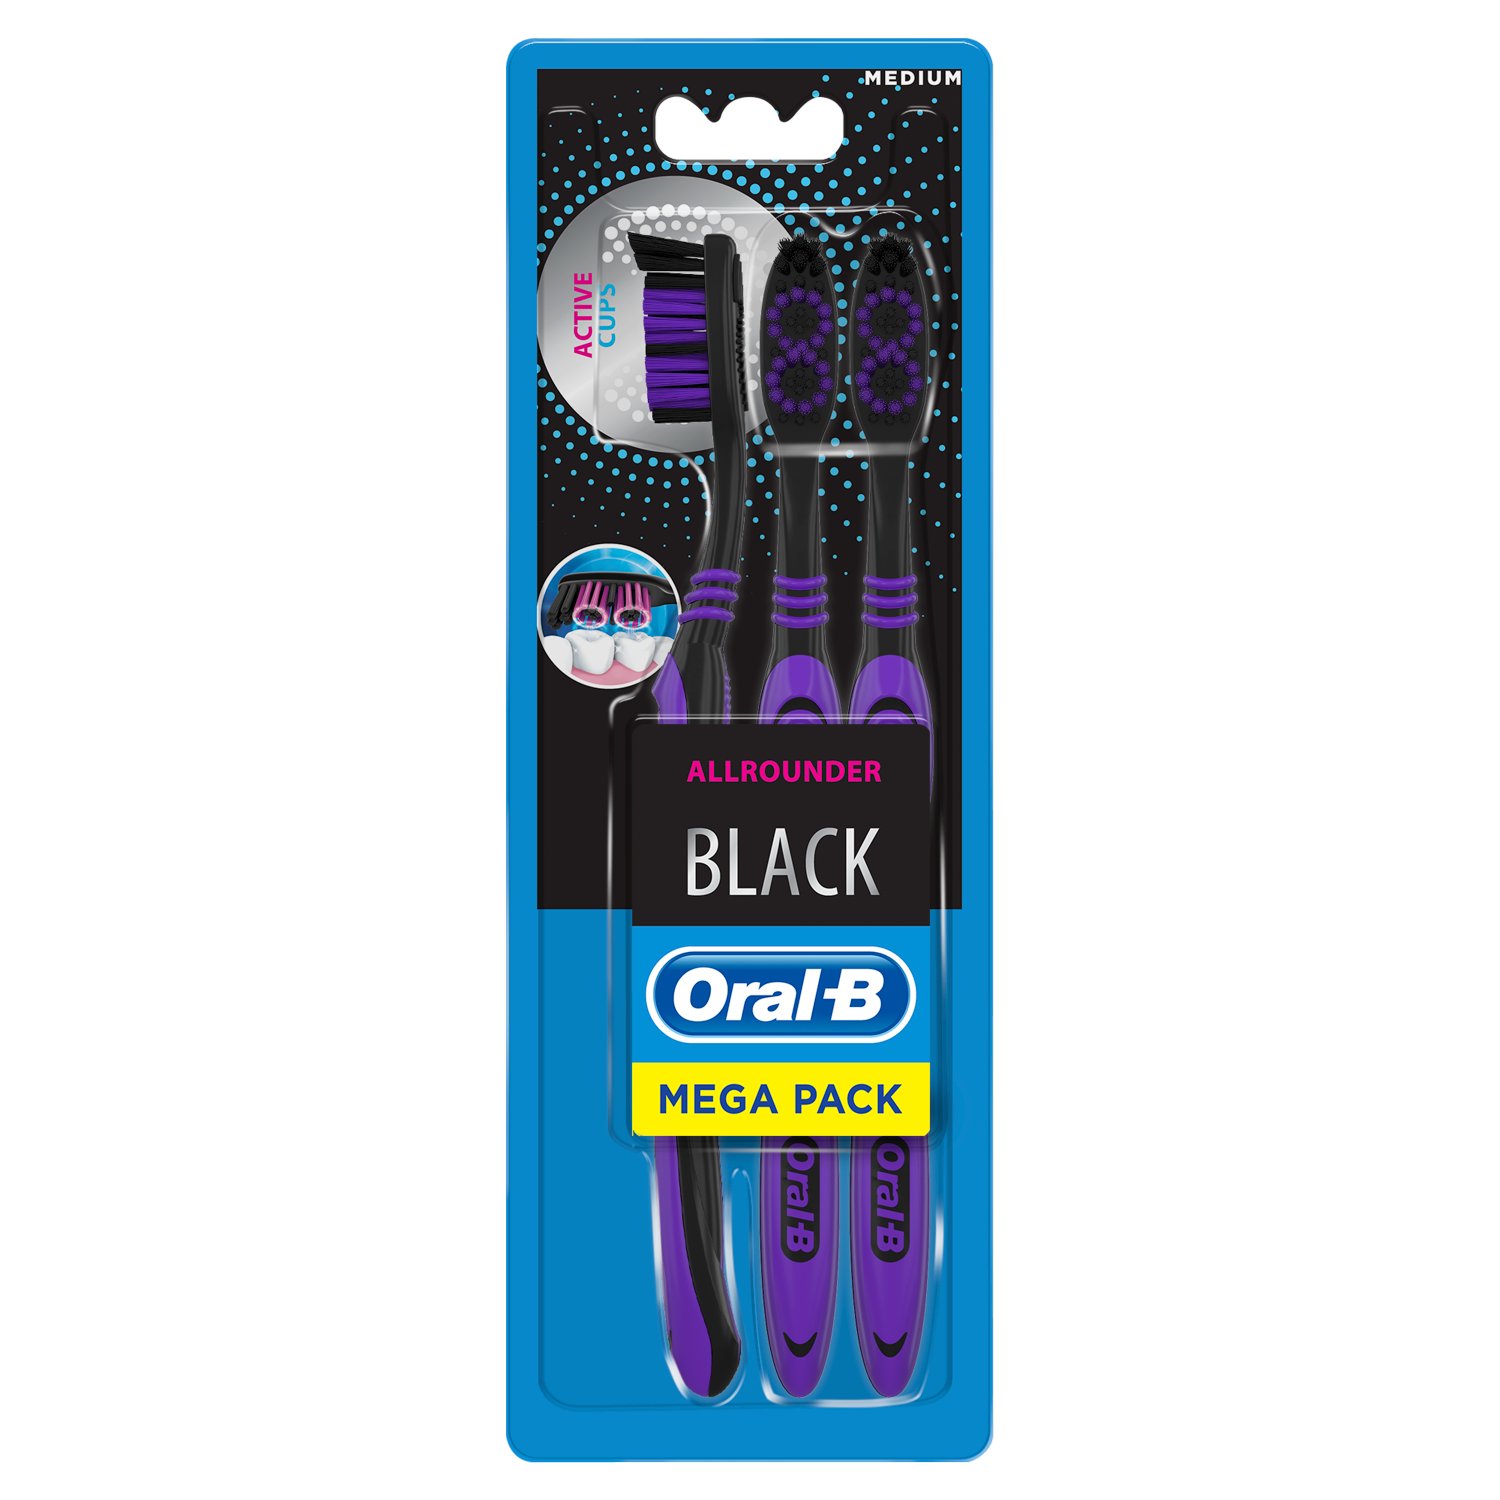 Oral-B Allrounder Black Toothbrush 3 Pack (3 Piece)